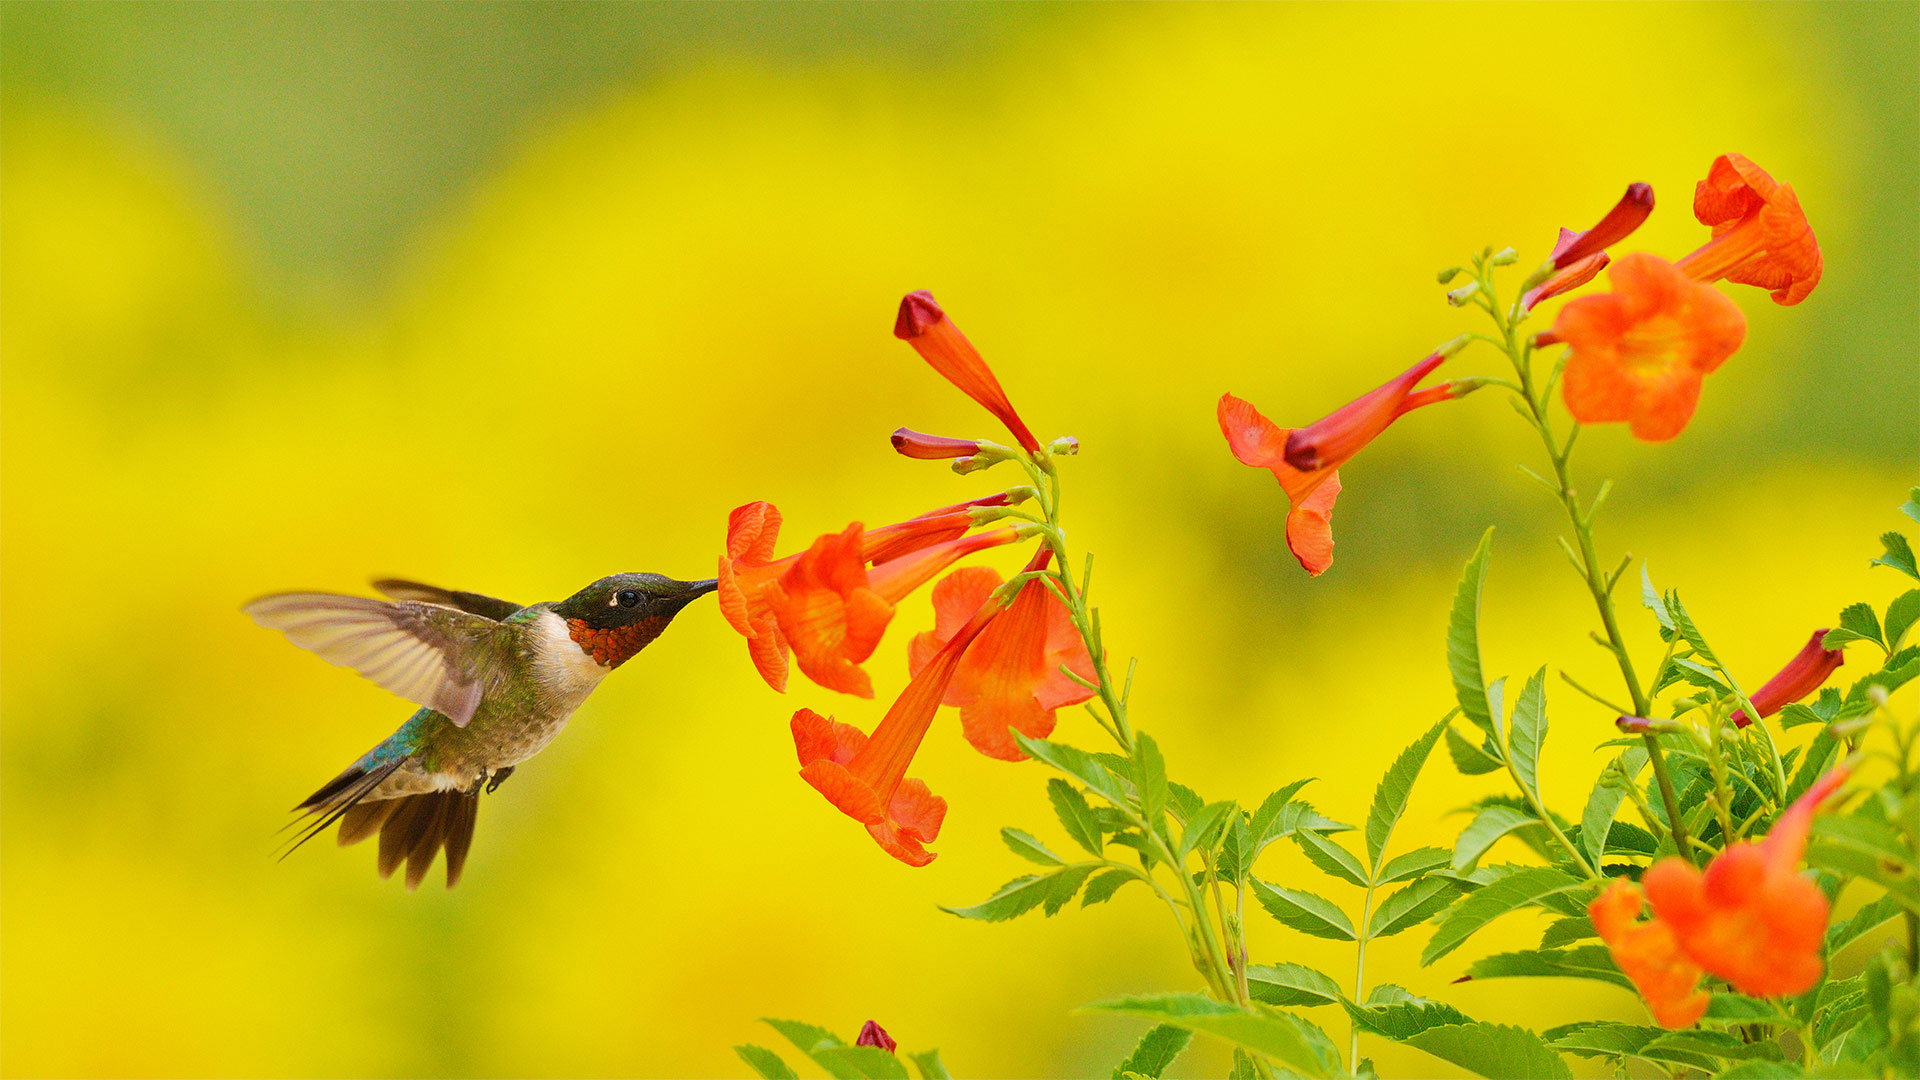 Ruby-throated hummingbird feeding on yellow bells in the Texas Hill Country - Rolf Nussbaumer/Danita Delimont)